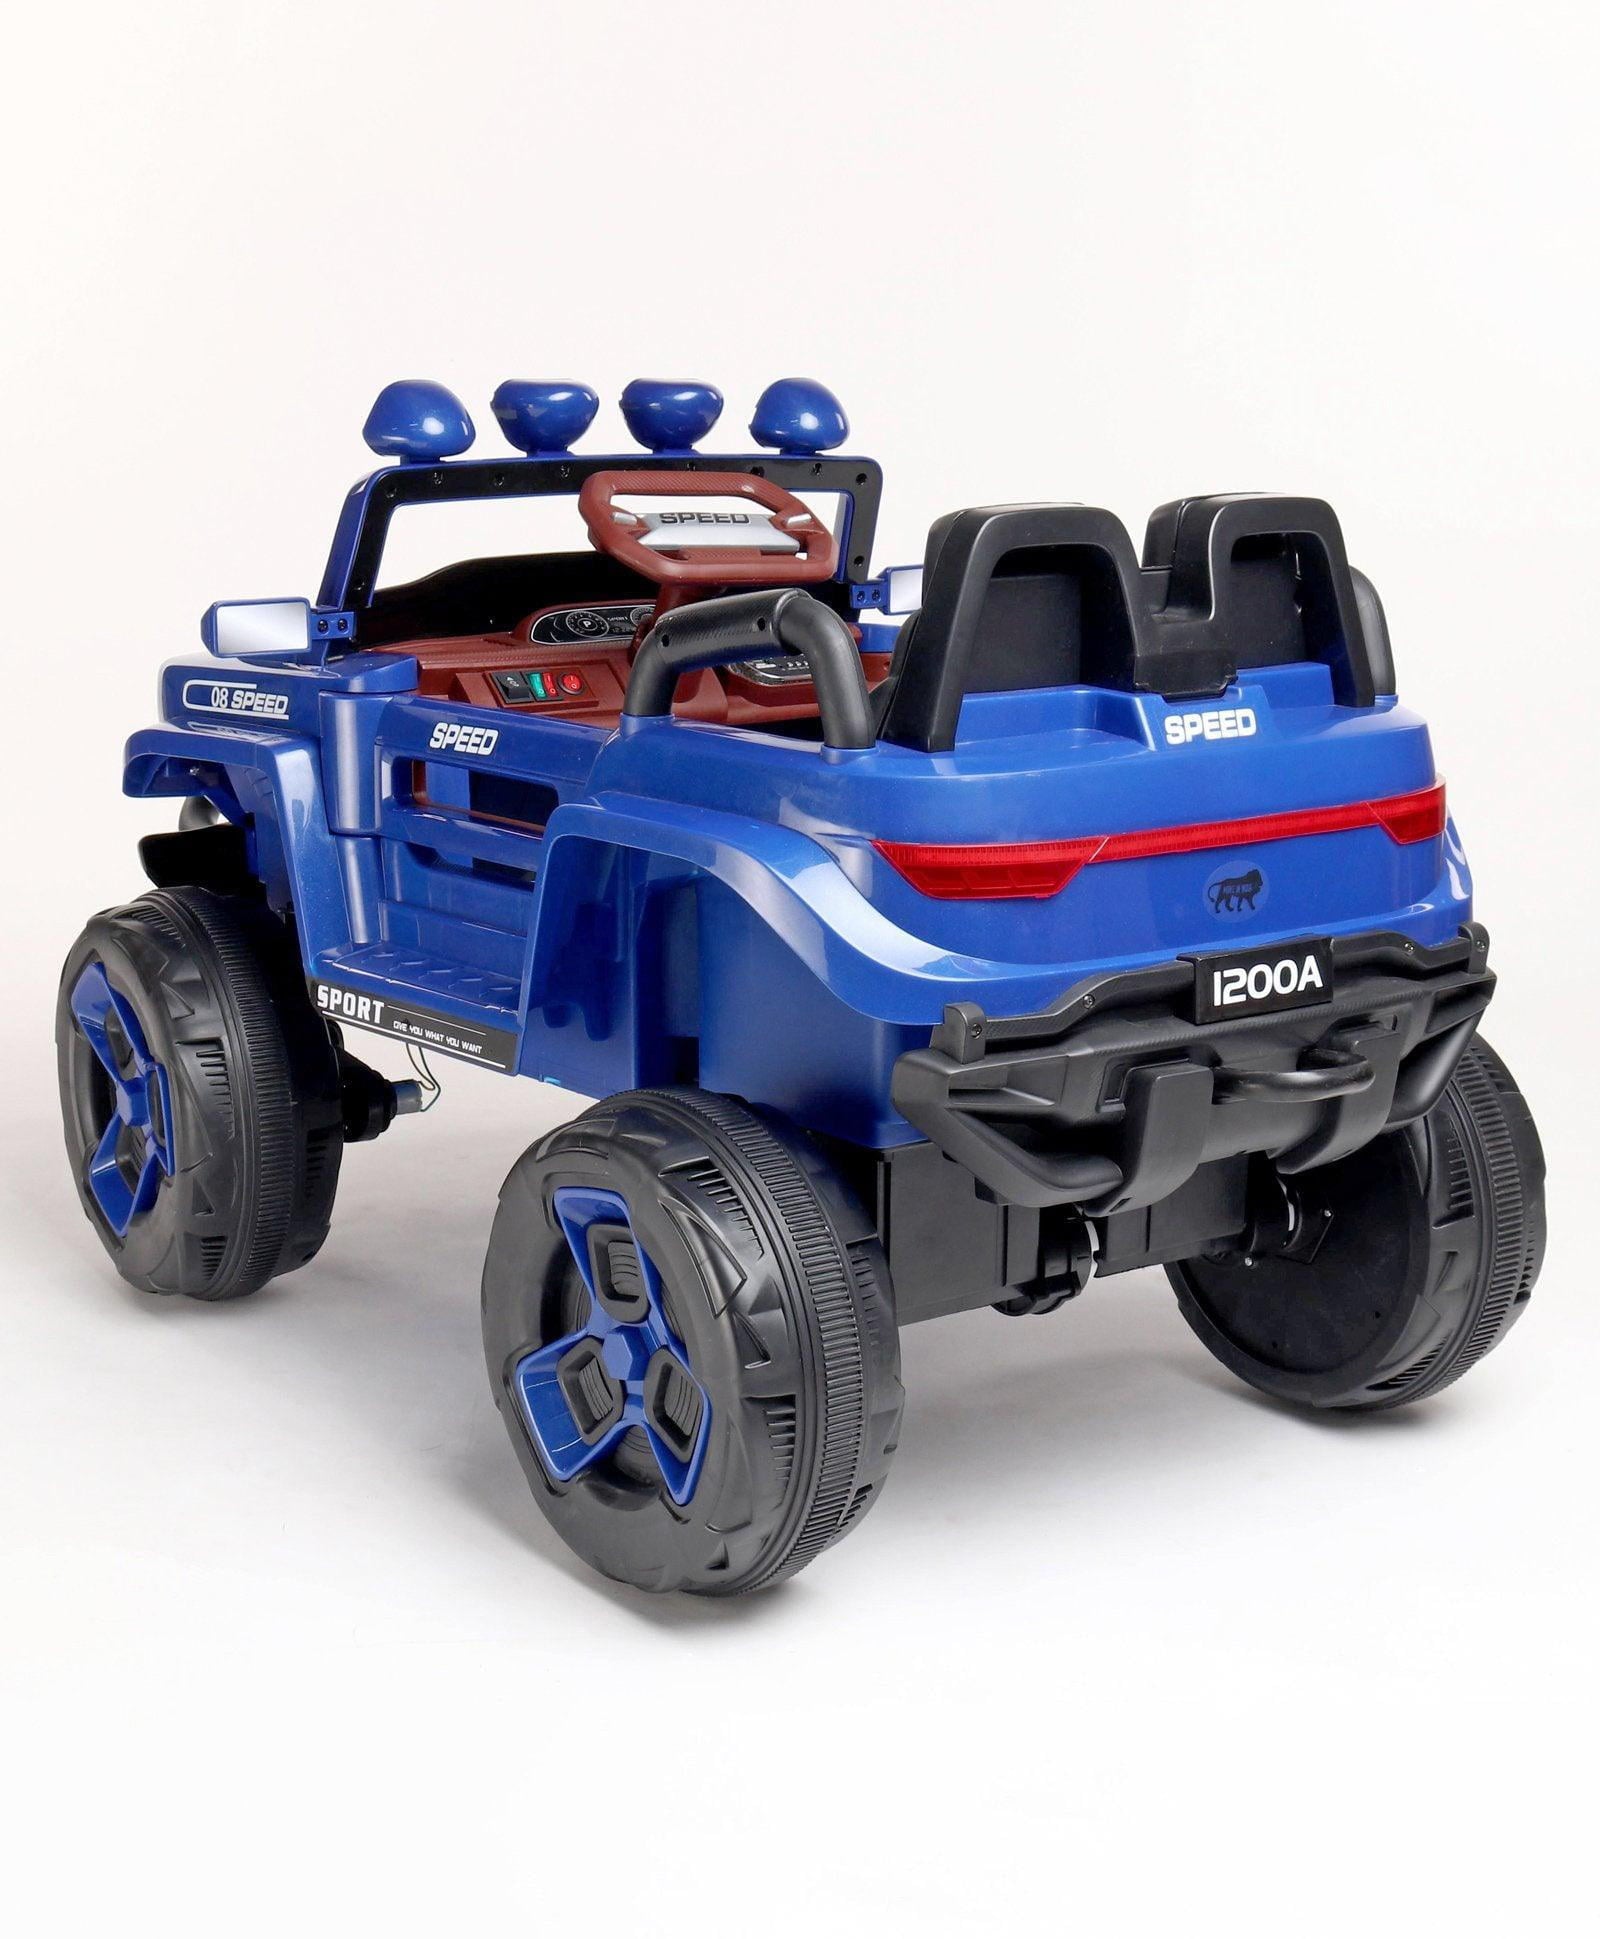 11 Cart 4x4 Bugatti Jeep for Kids with Remote Control | Button- Start Function - 11Cart